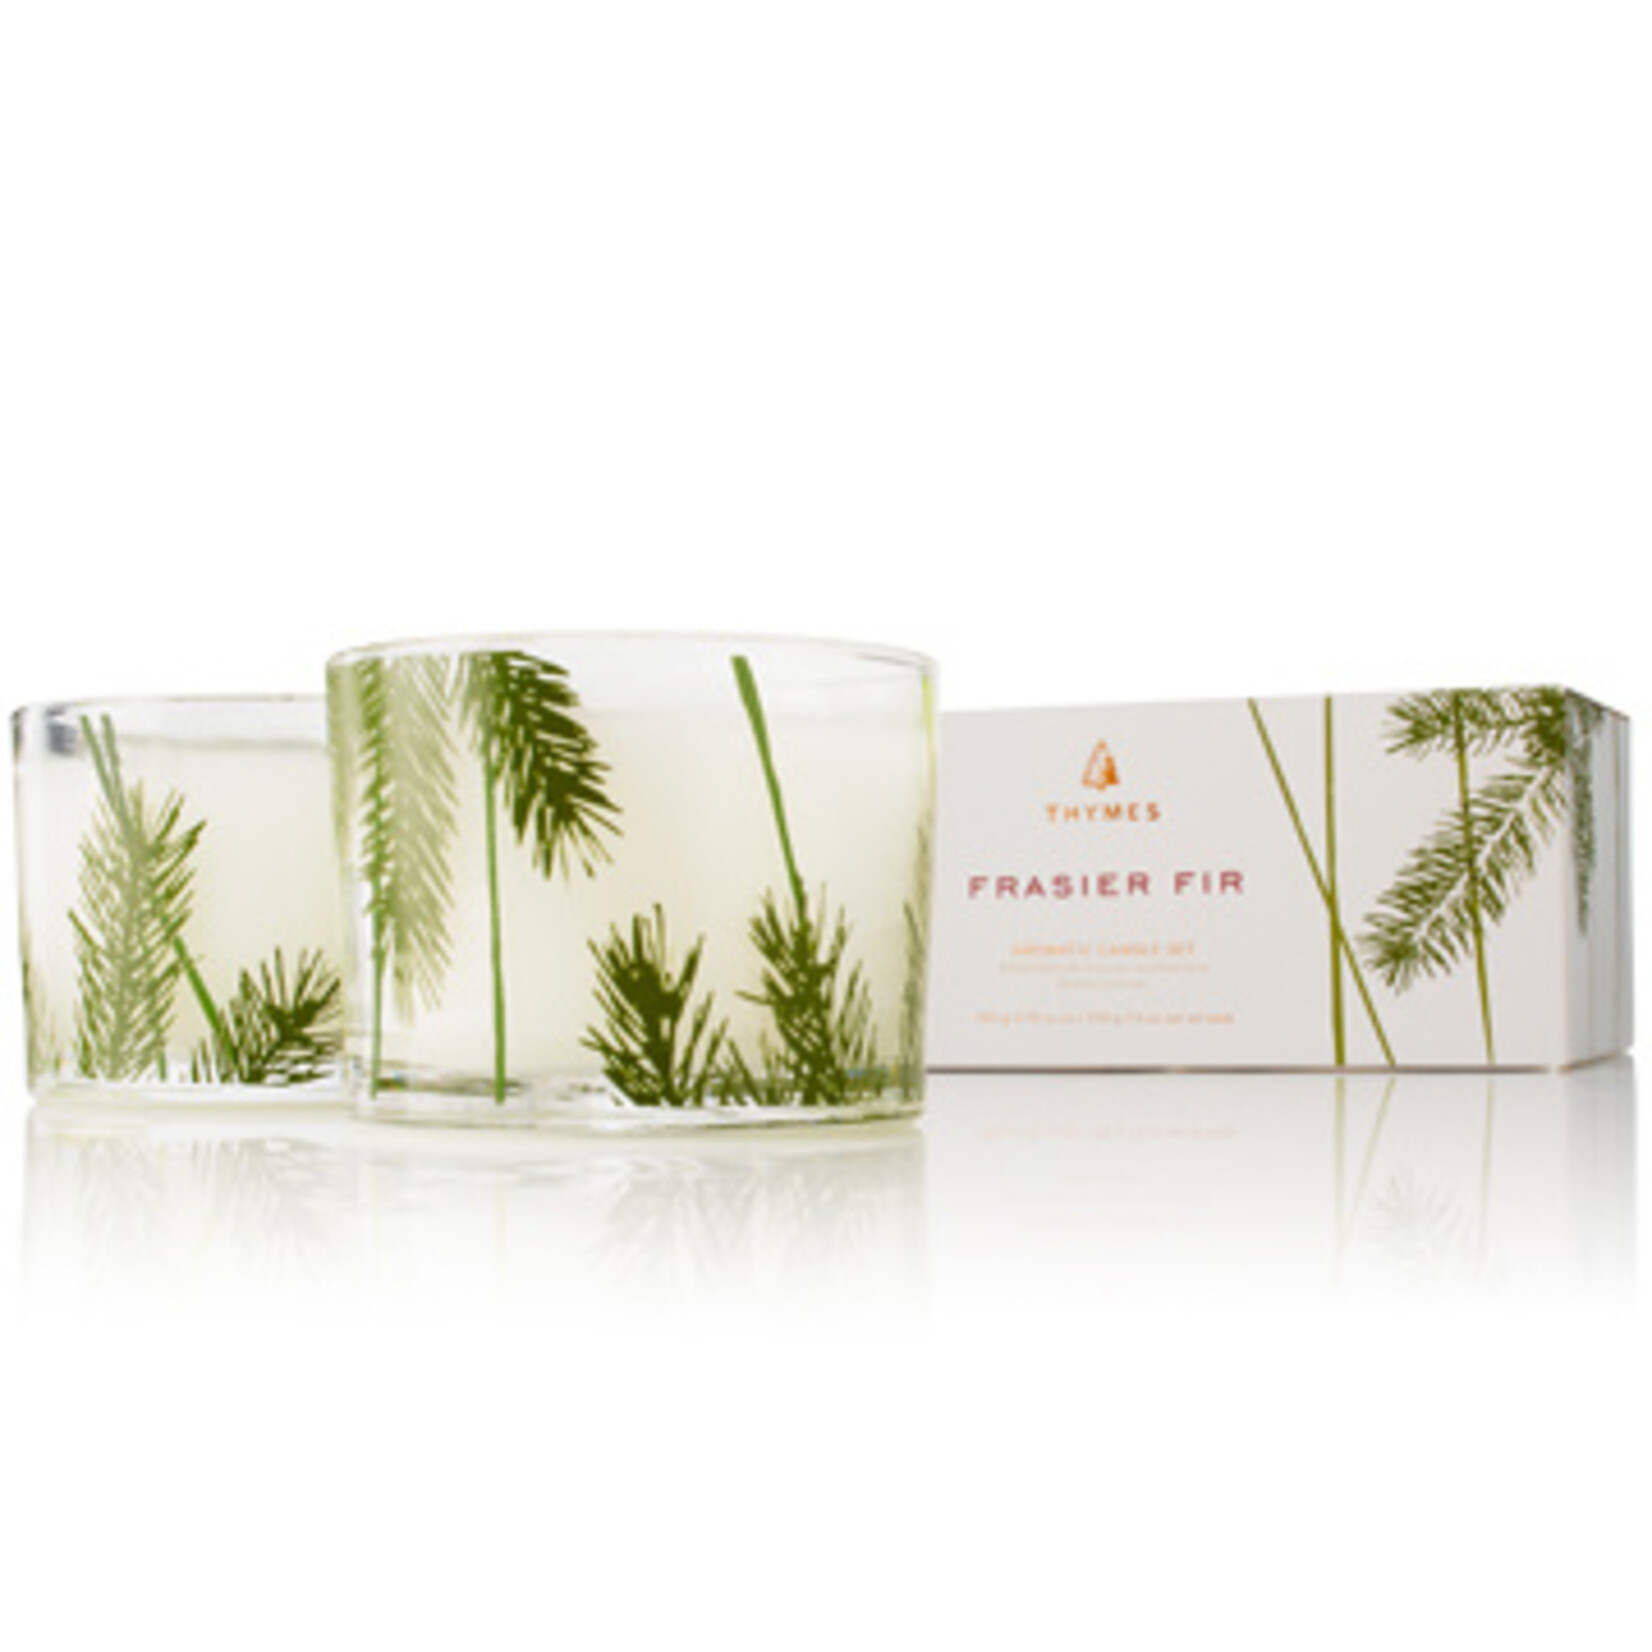 Frasier Fir Collection - Pine Needle Candle Set